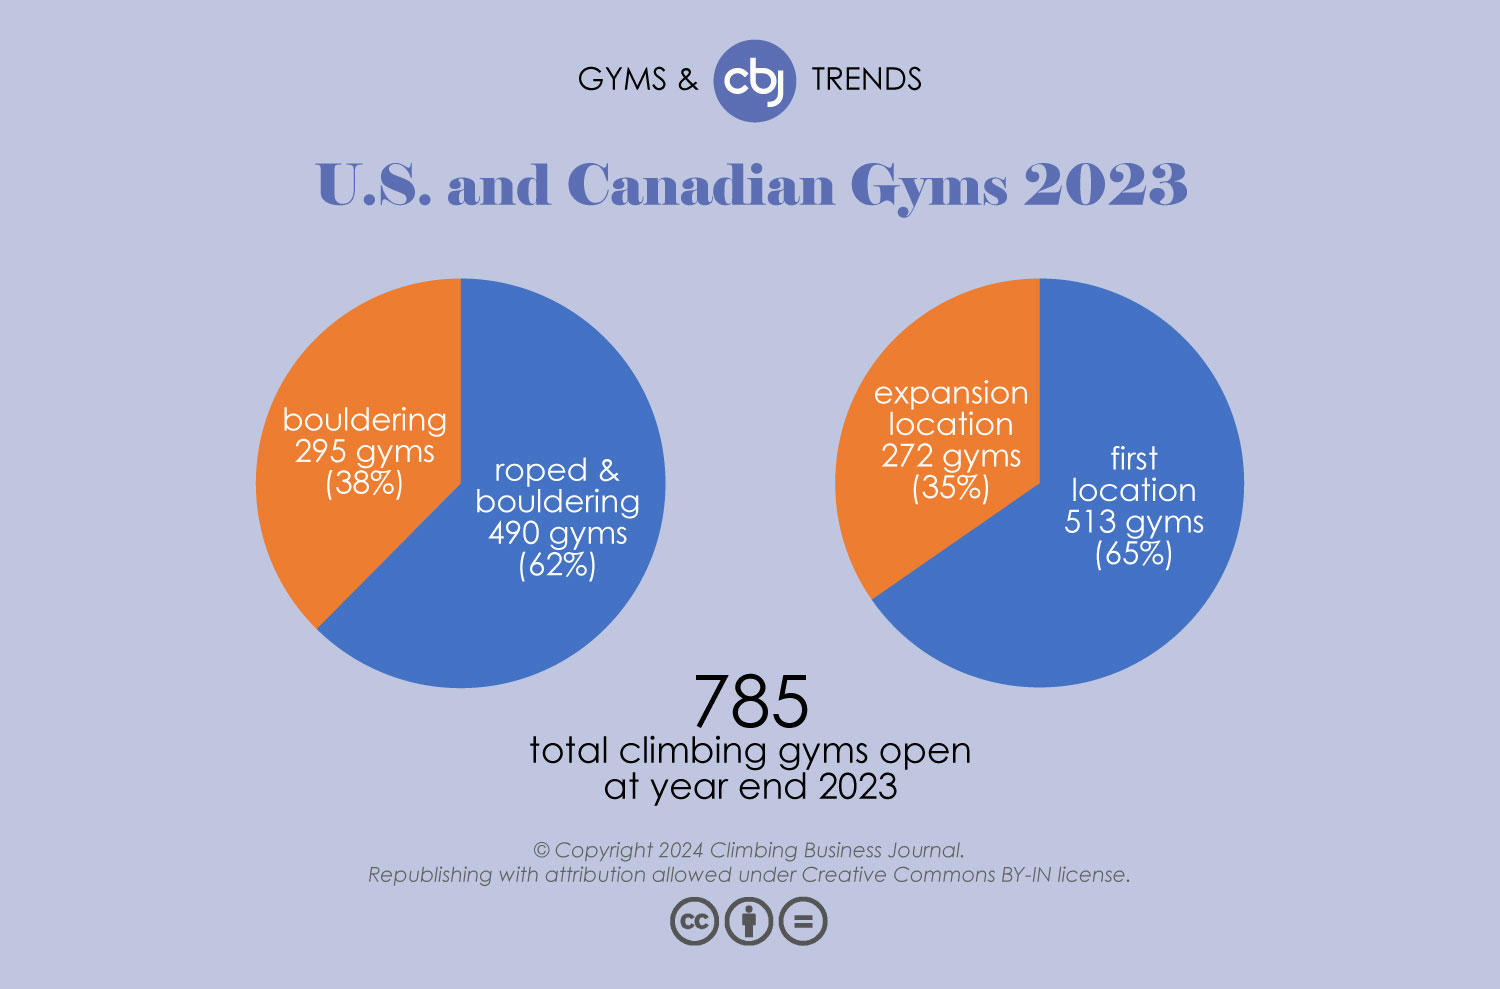 U.S. and Canadian Gyms 2023